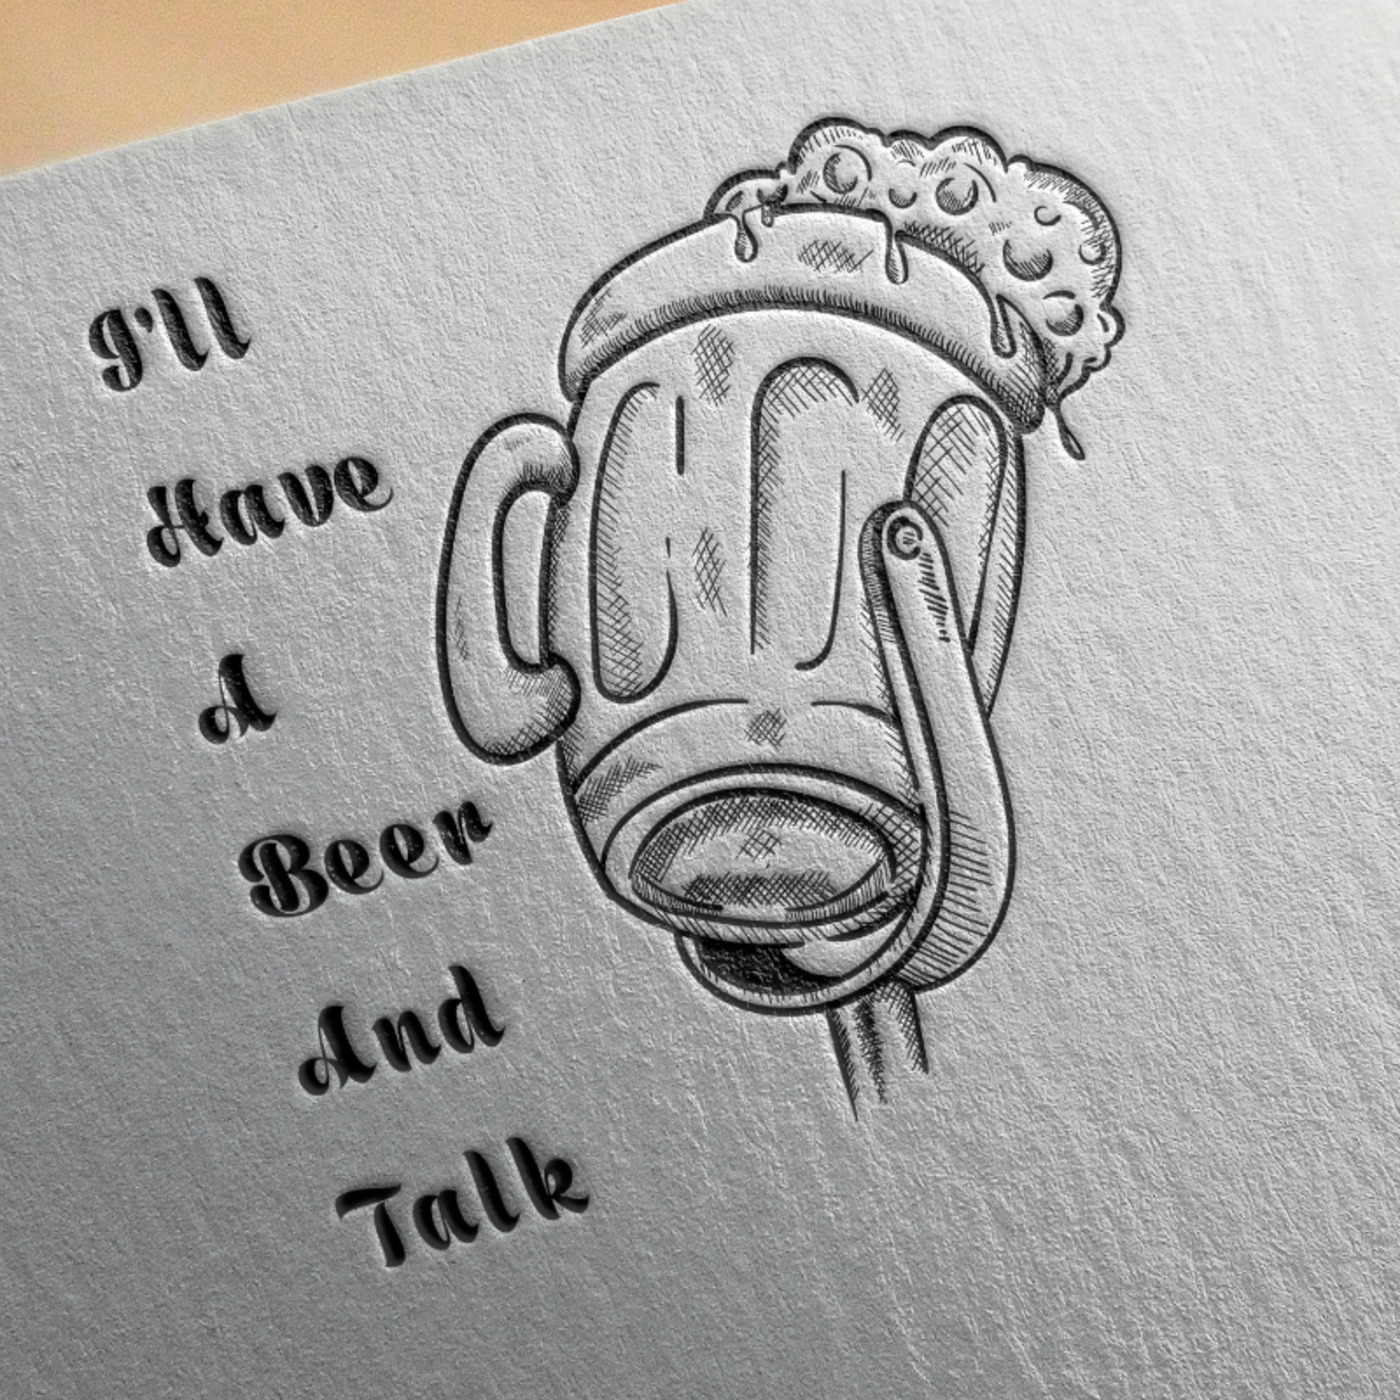 I'll Have A Beer And Talk